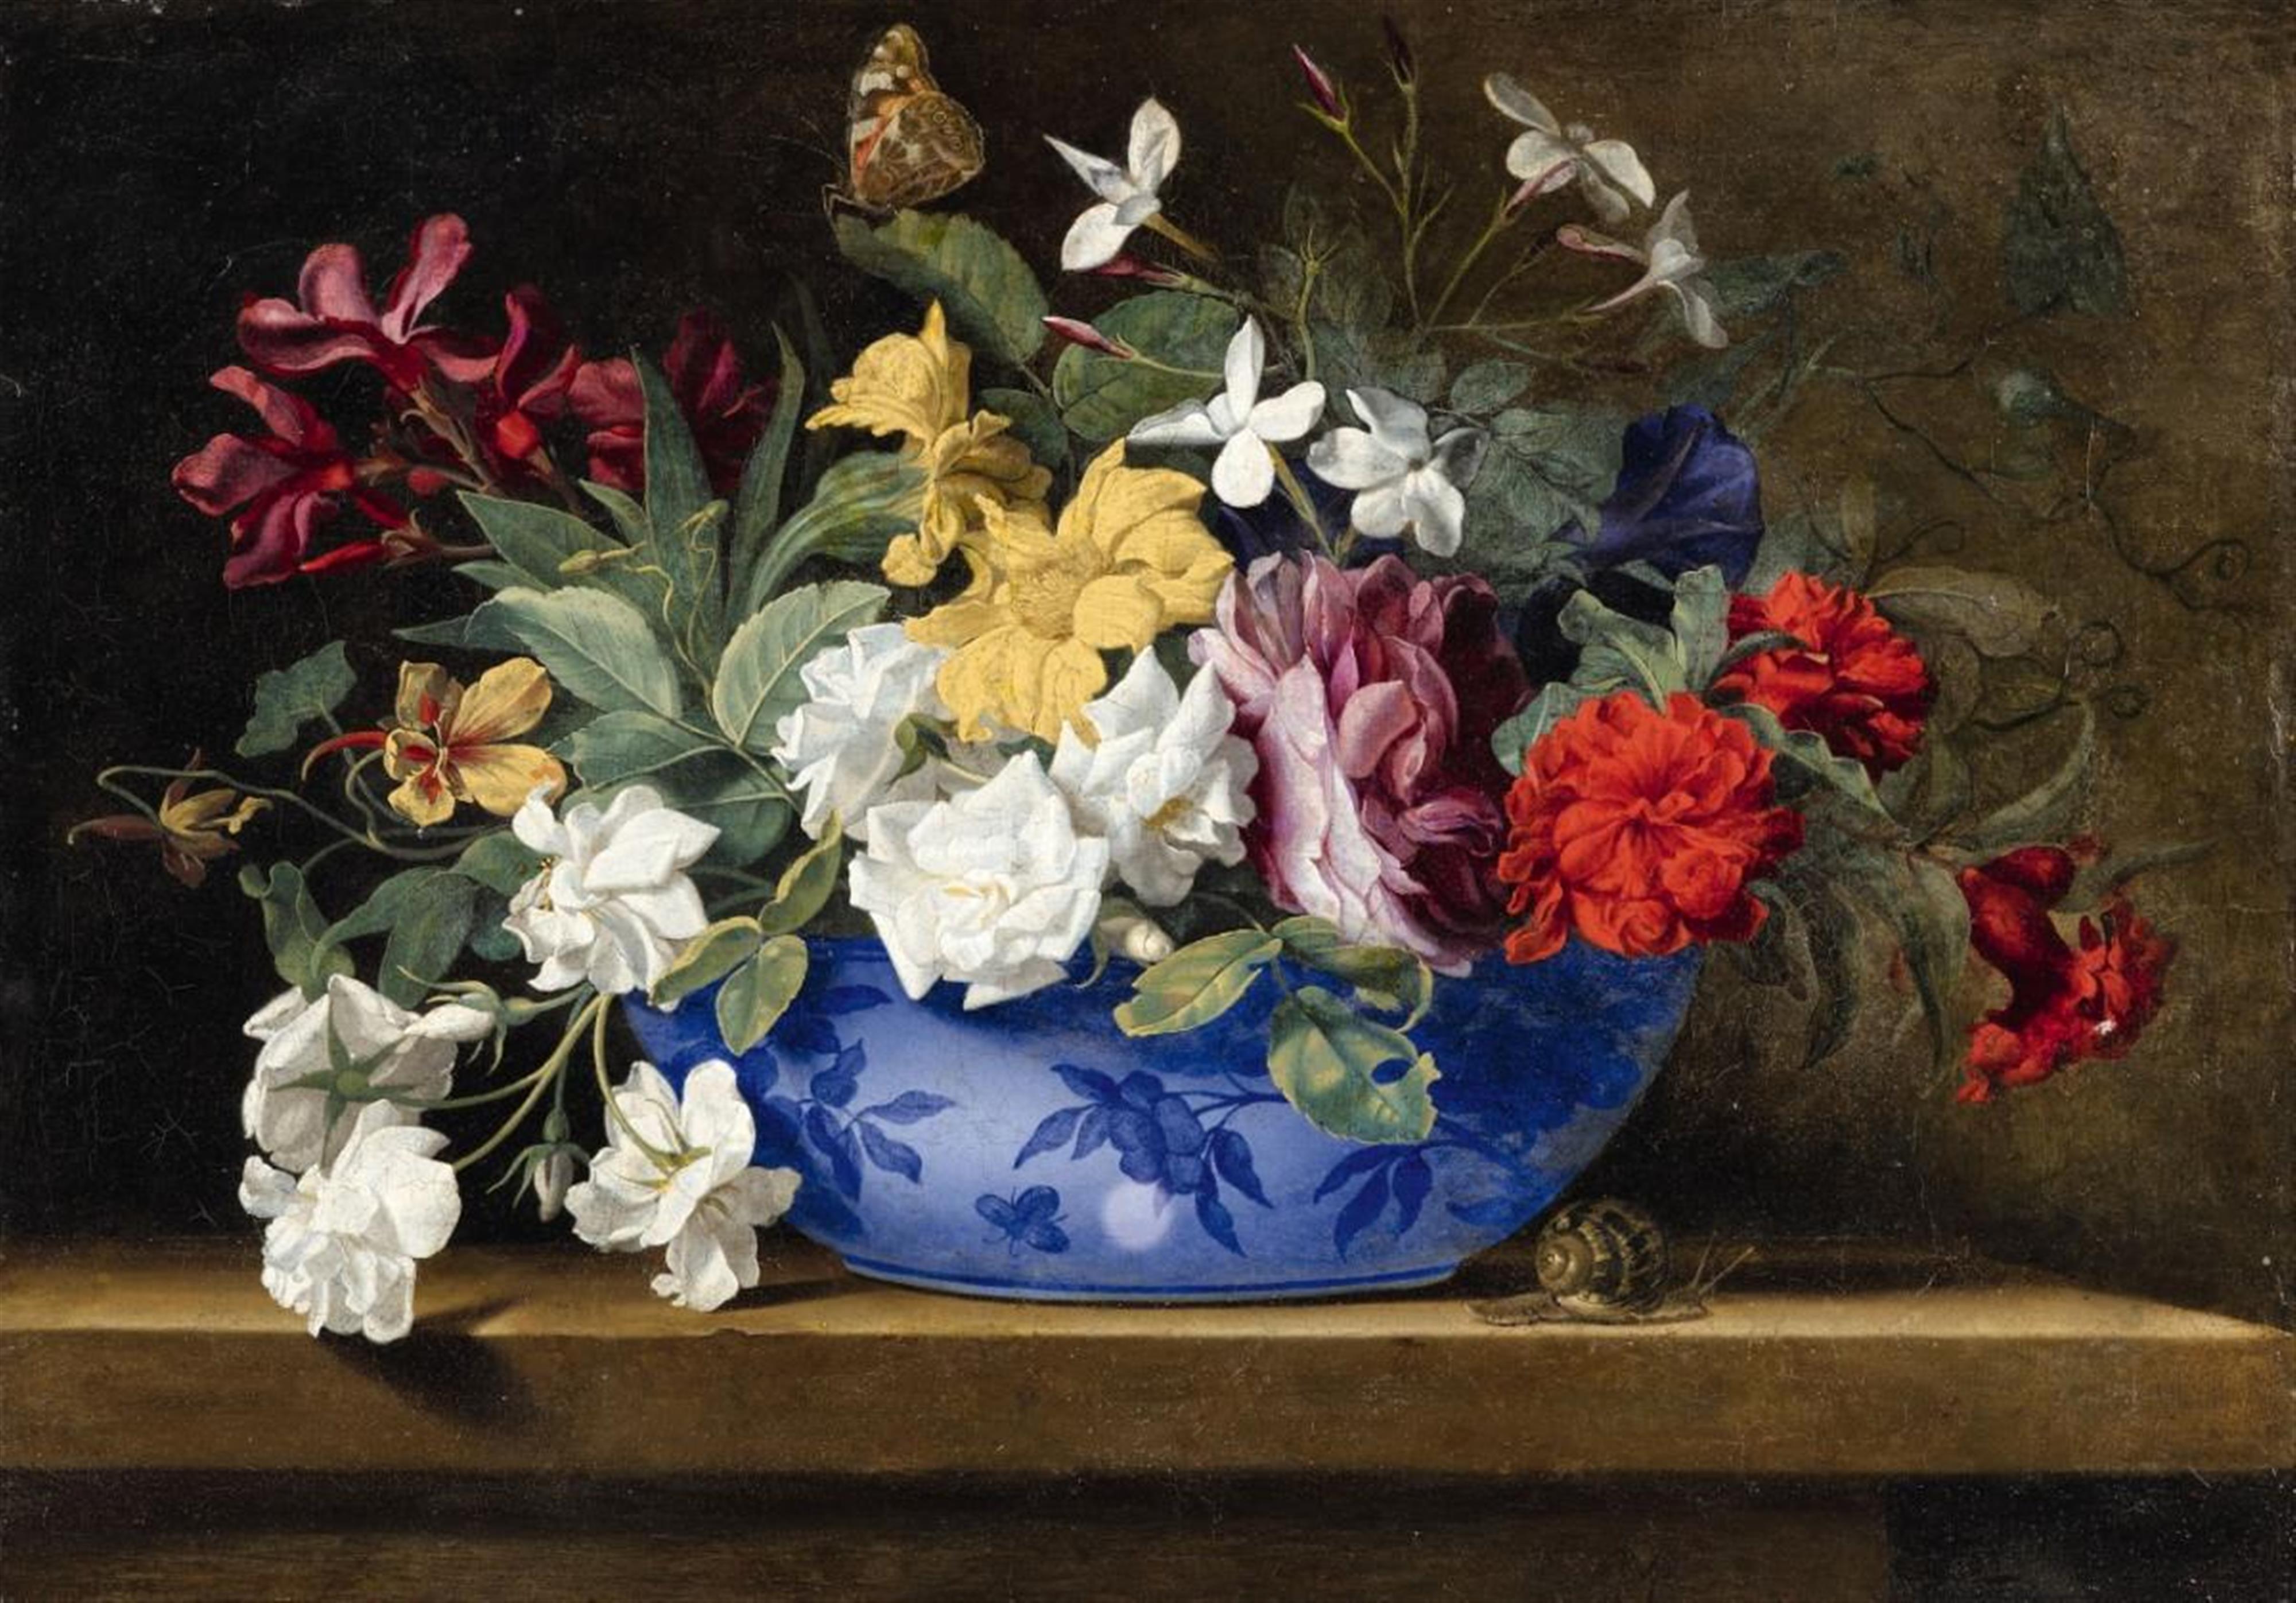 Jean-Michel Picart - Floral Still Life with a Snail and Butterfly